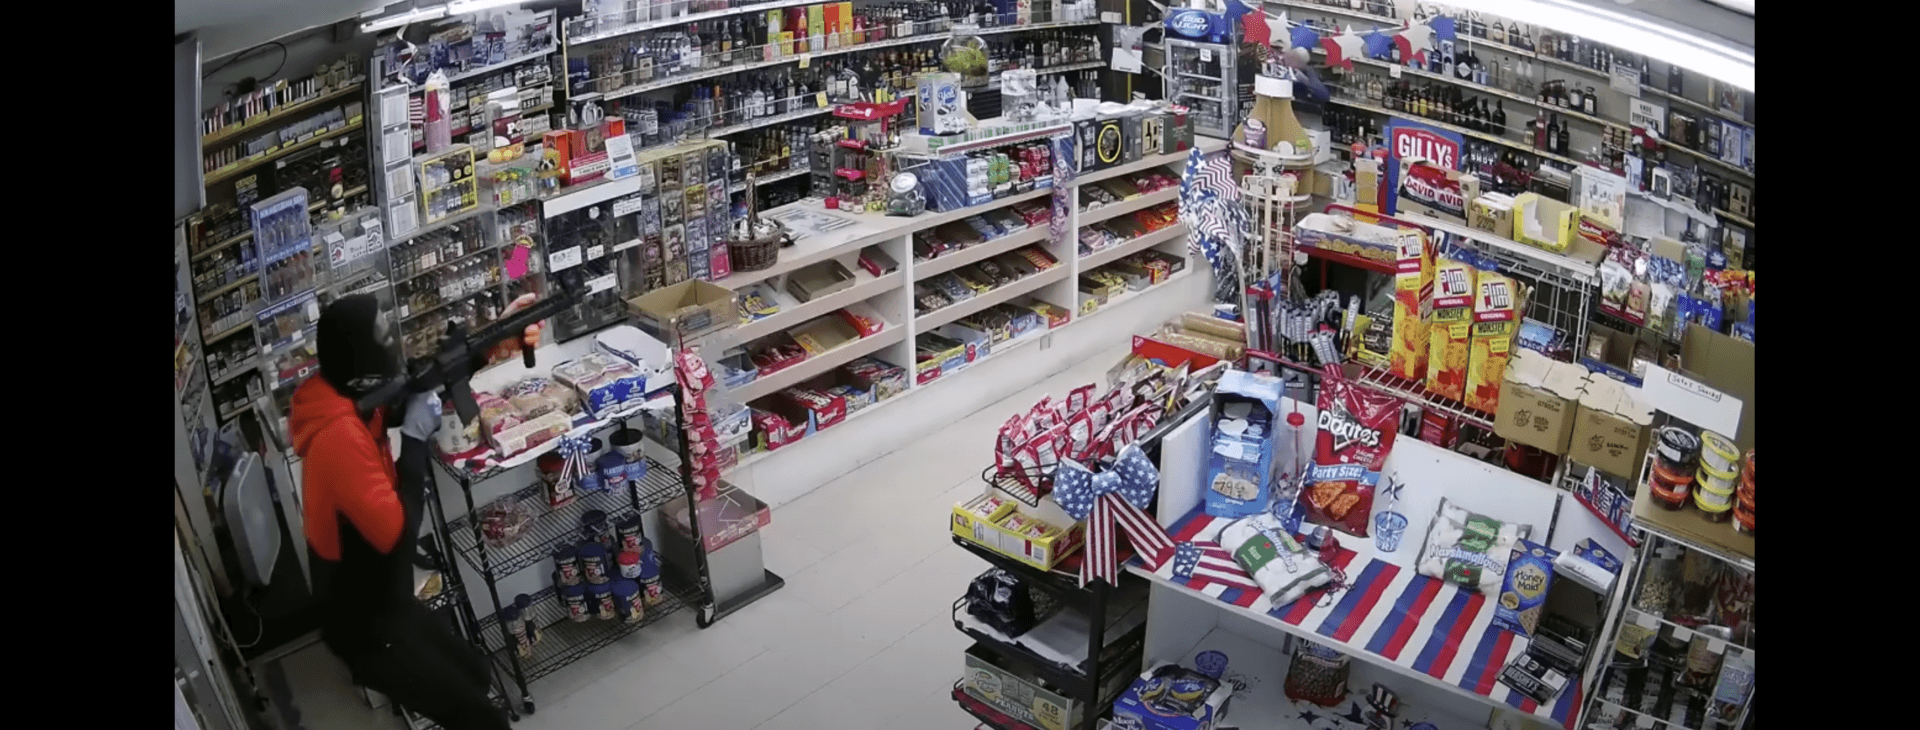 Video: 80-year-old store owner uses shotgun to stop armed robbers